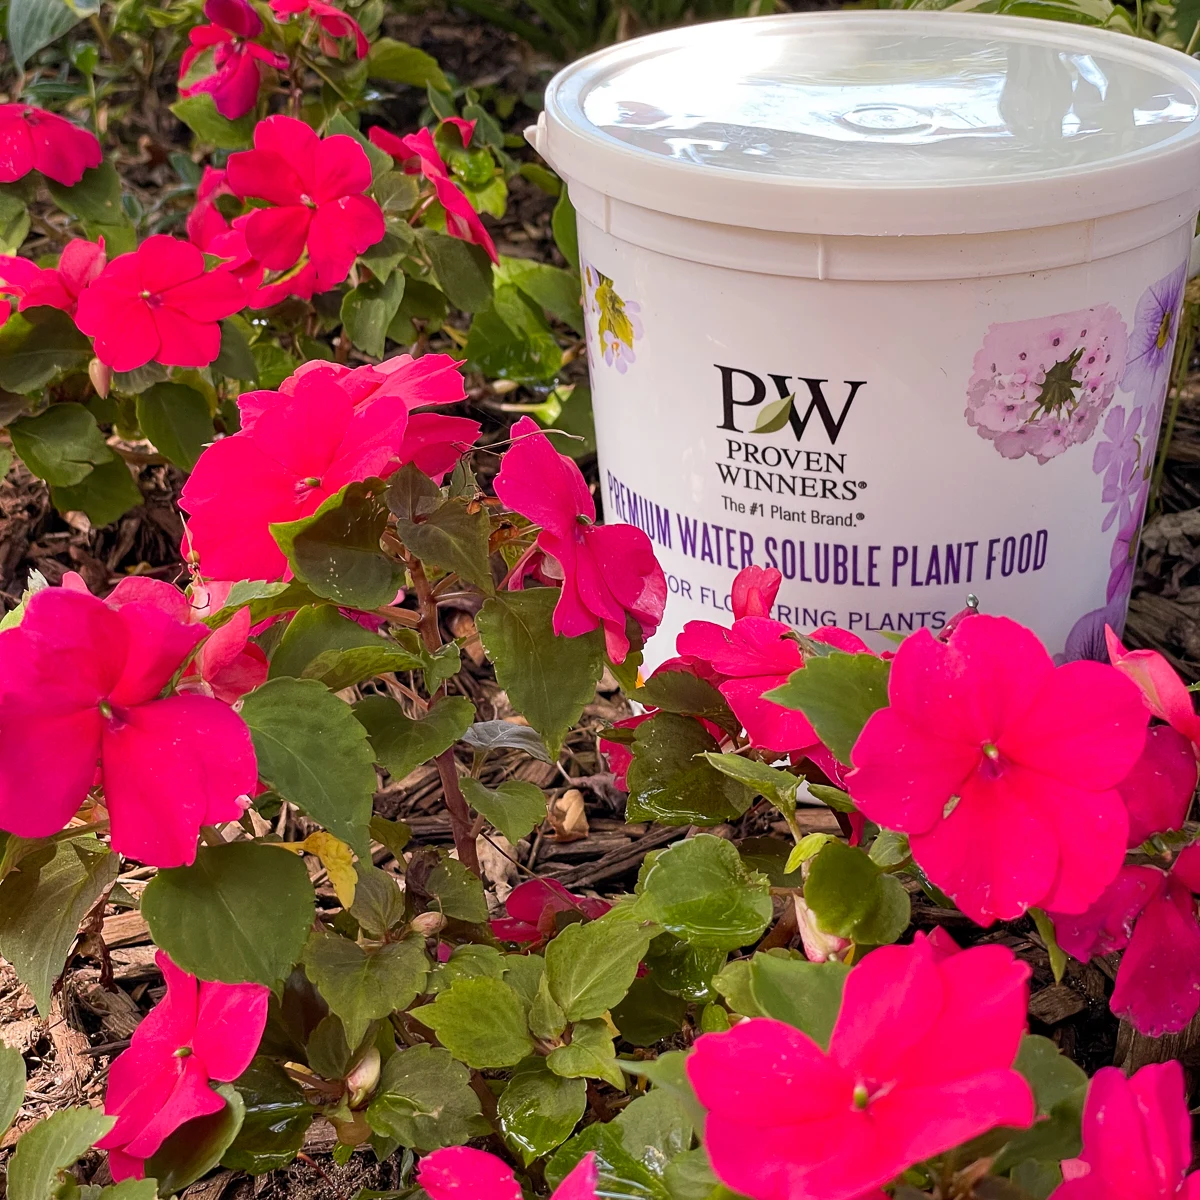 Proven Winners water soluble plant food container next to pink impatiens